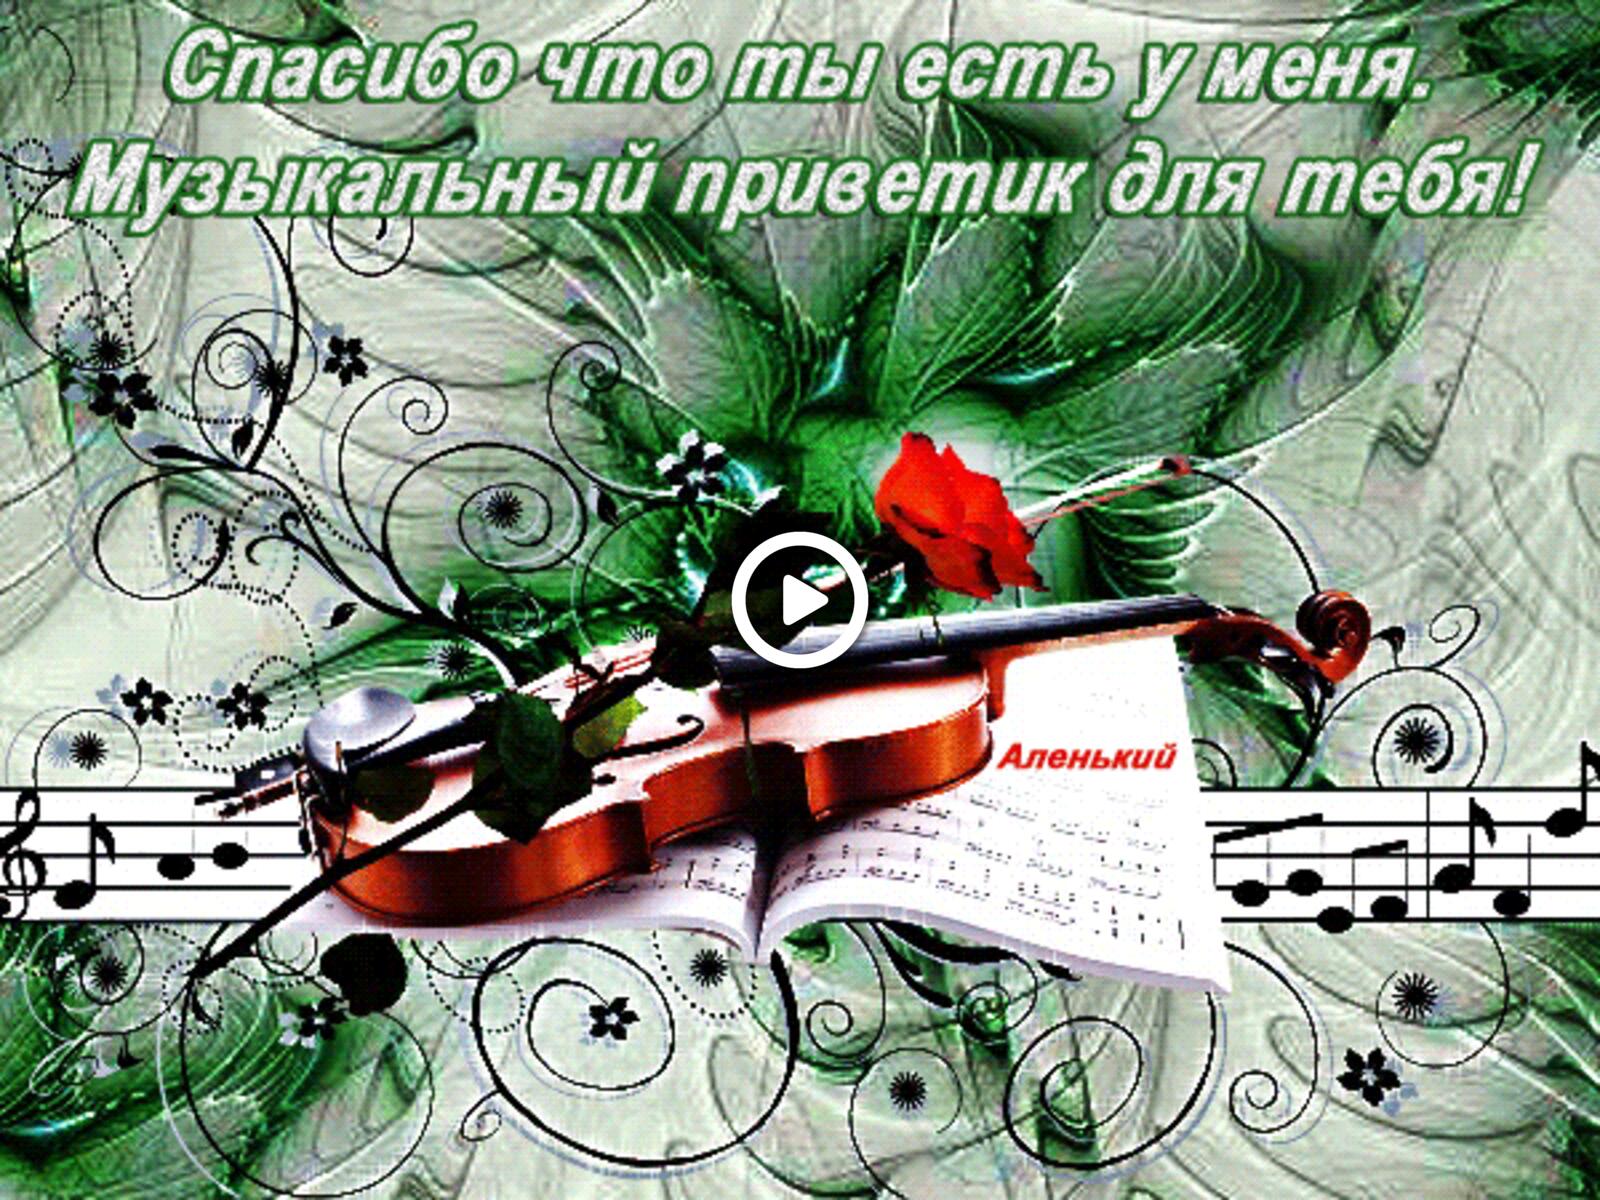 violin thank you for being there thank you for having me